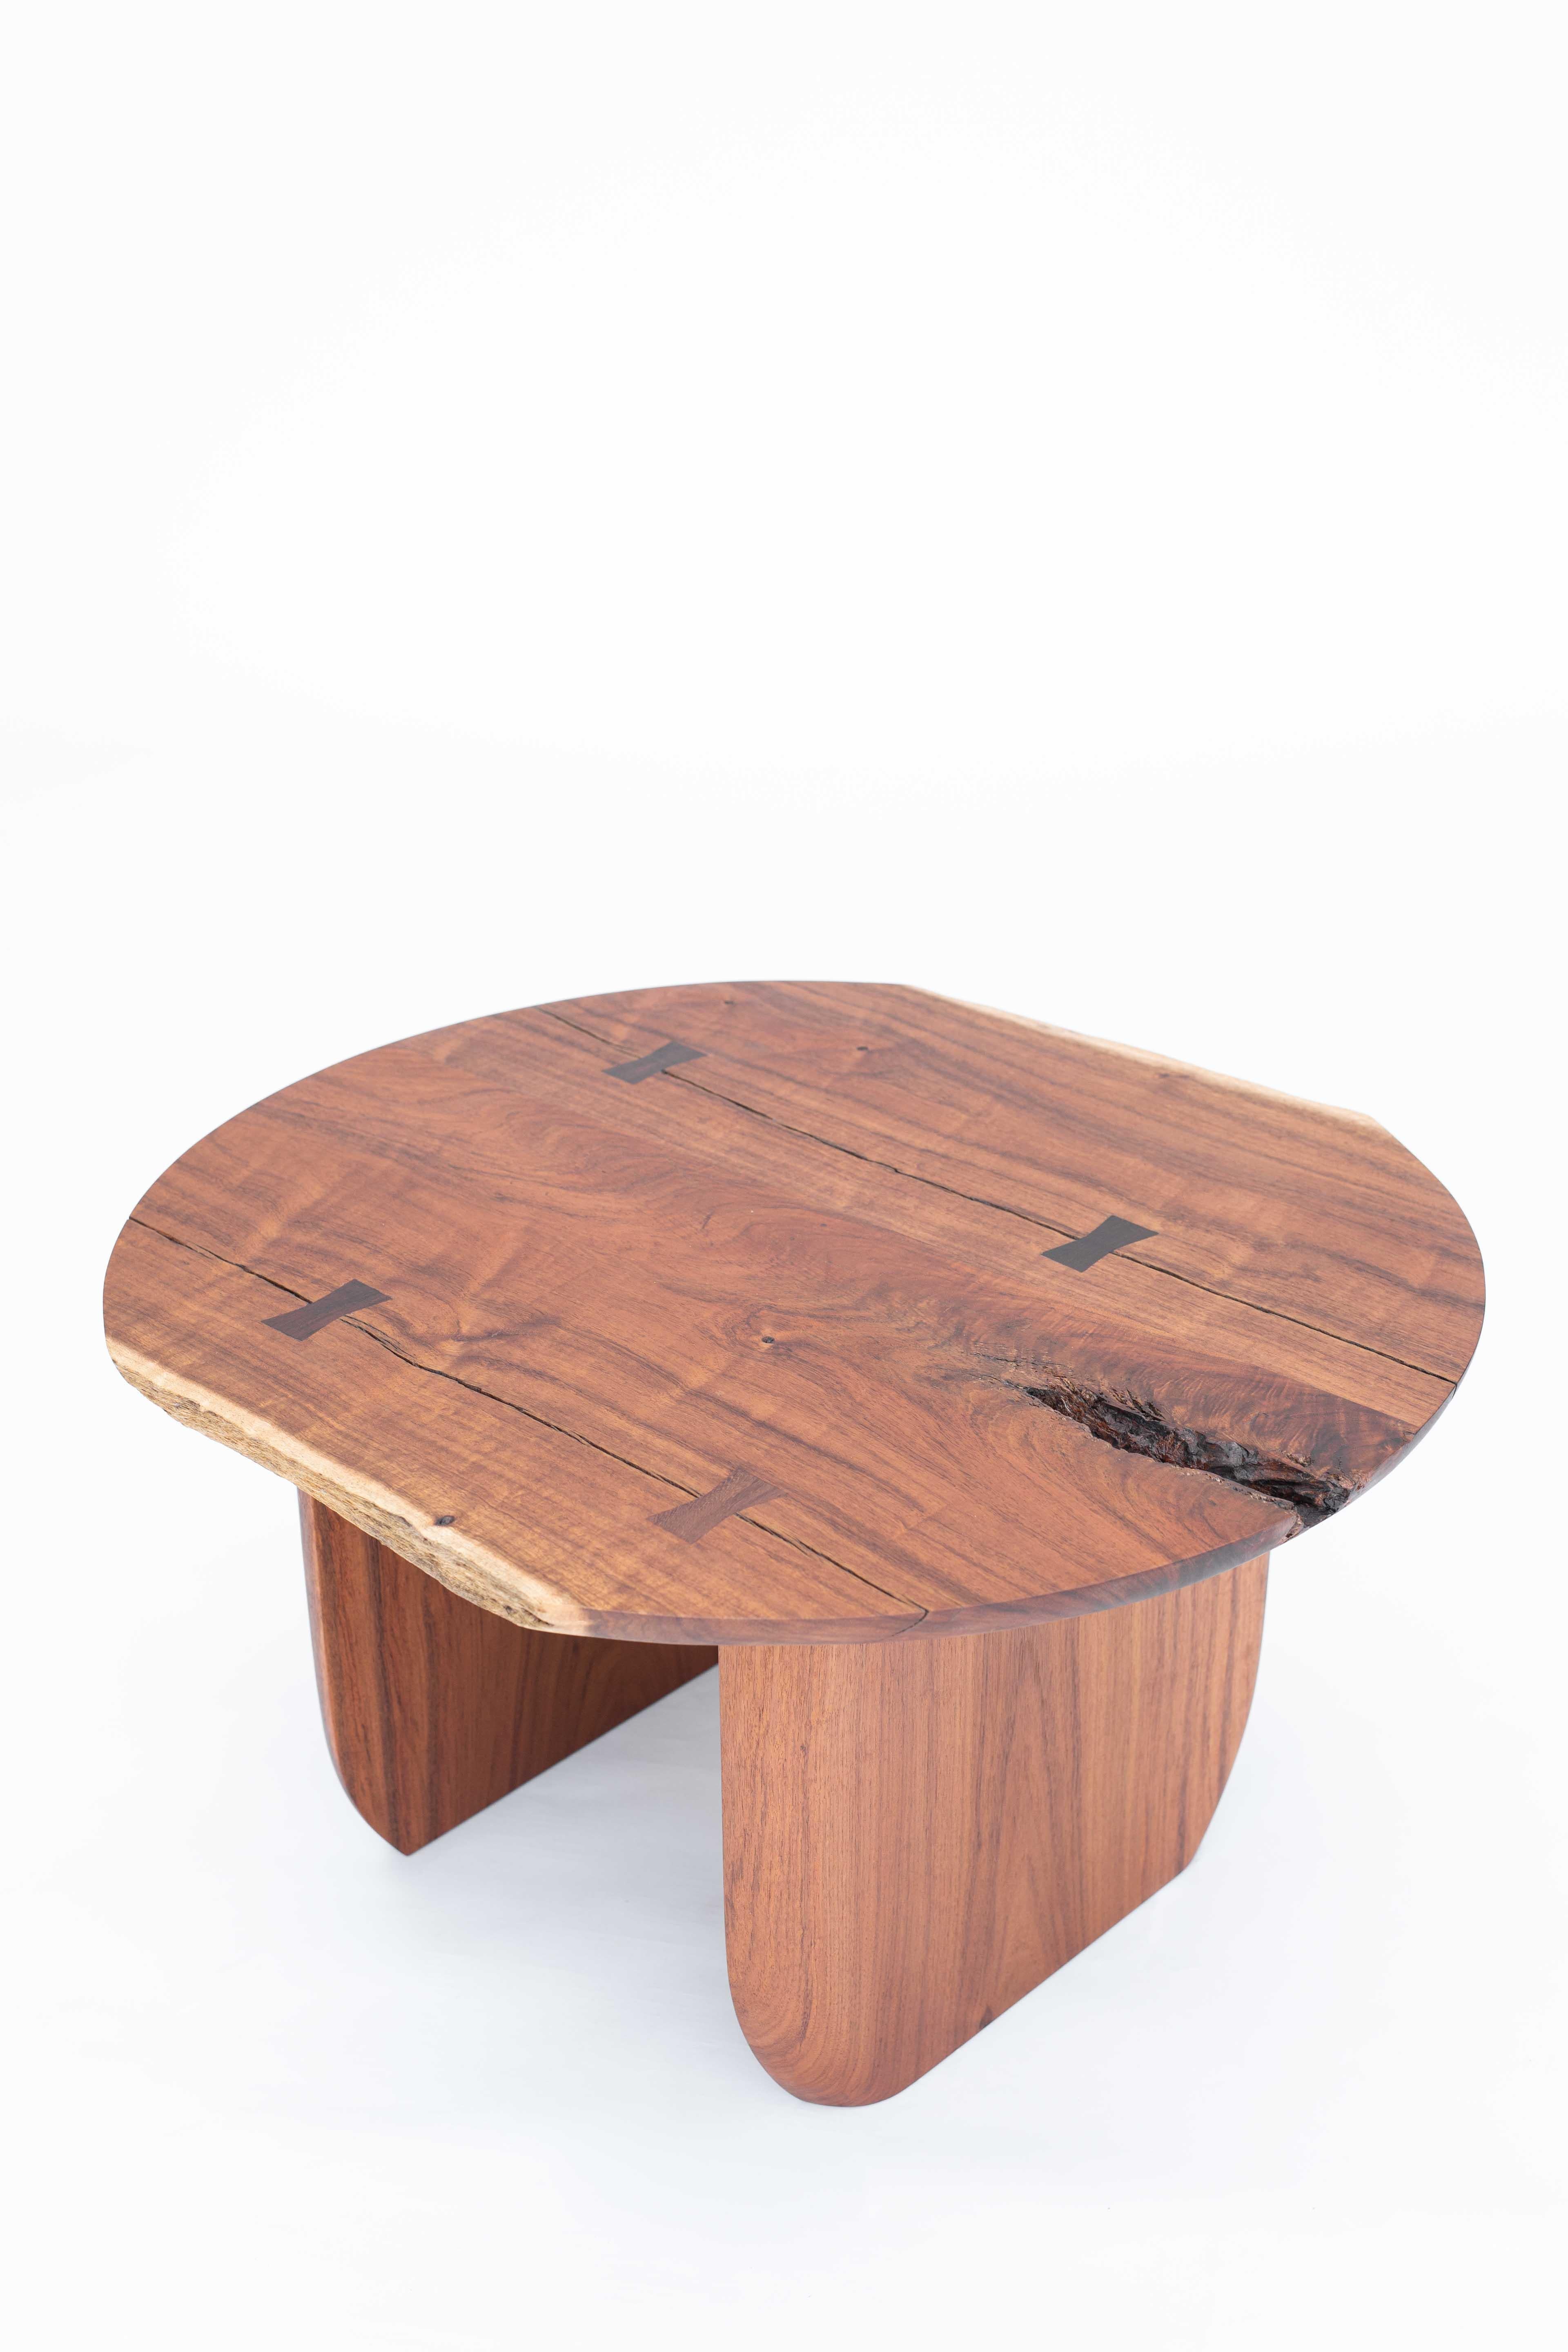 Woodwork Organic Modern Coffee Table in Caribbean Walnut Tropical Wood, Unique Piece For Sale